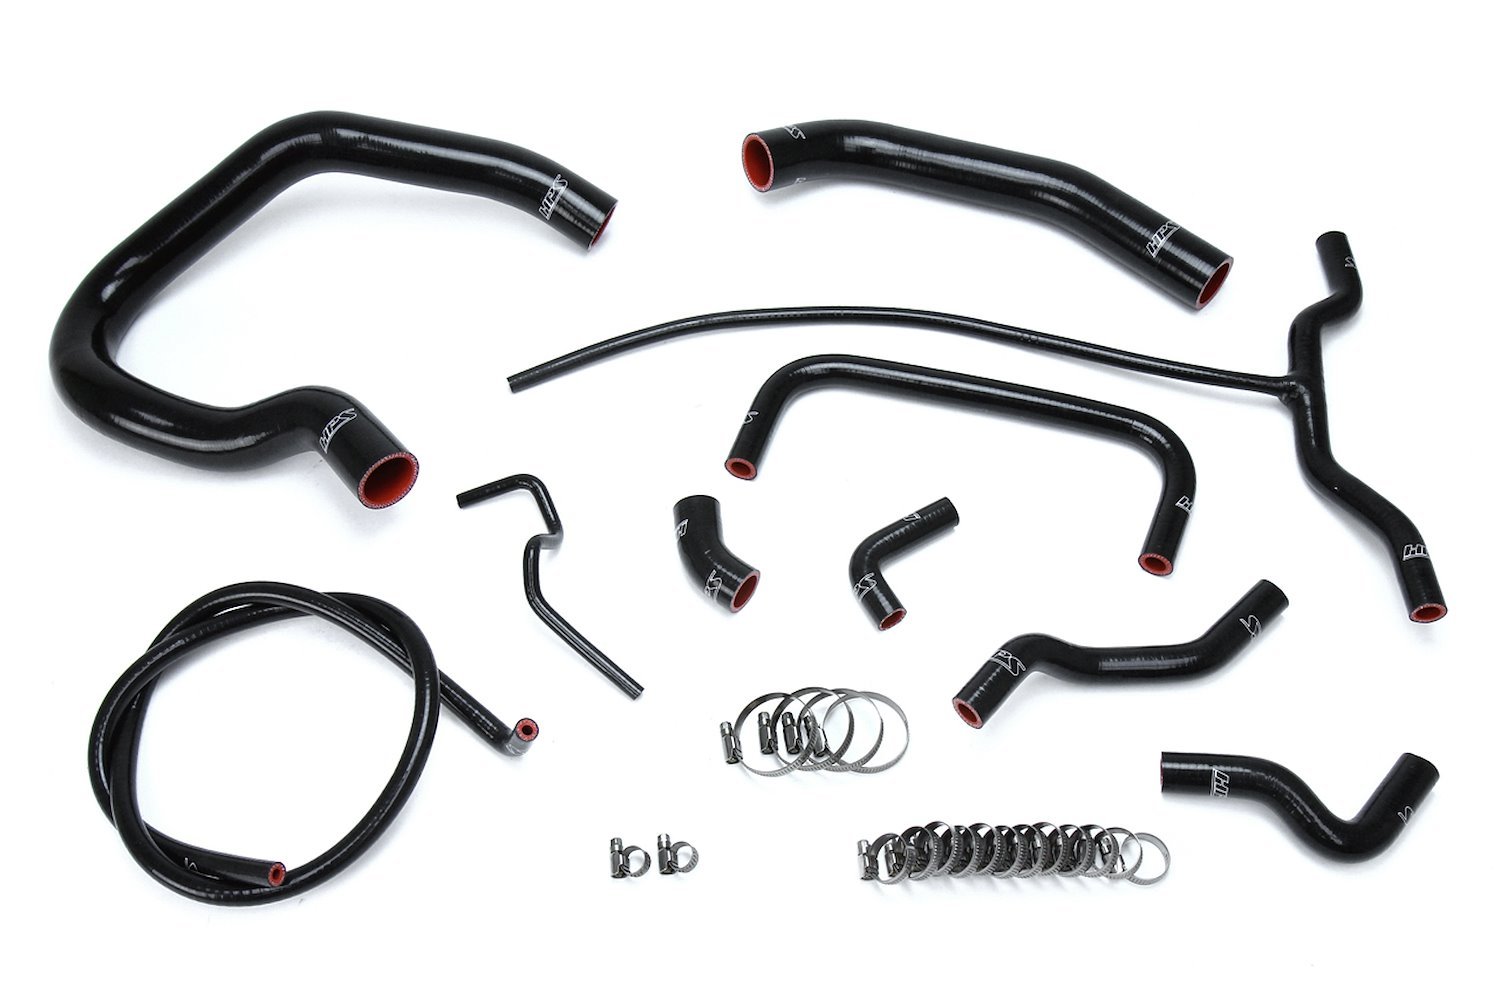 57-1661-BLK Coolant Hose Kit, High-Temp 3-Ply Reinforced Silicone, Replace Rubber Radiator Heater Coolant Hoses